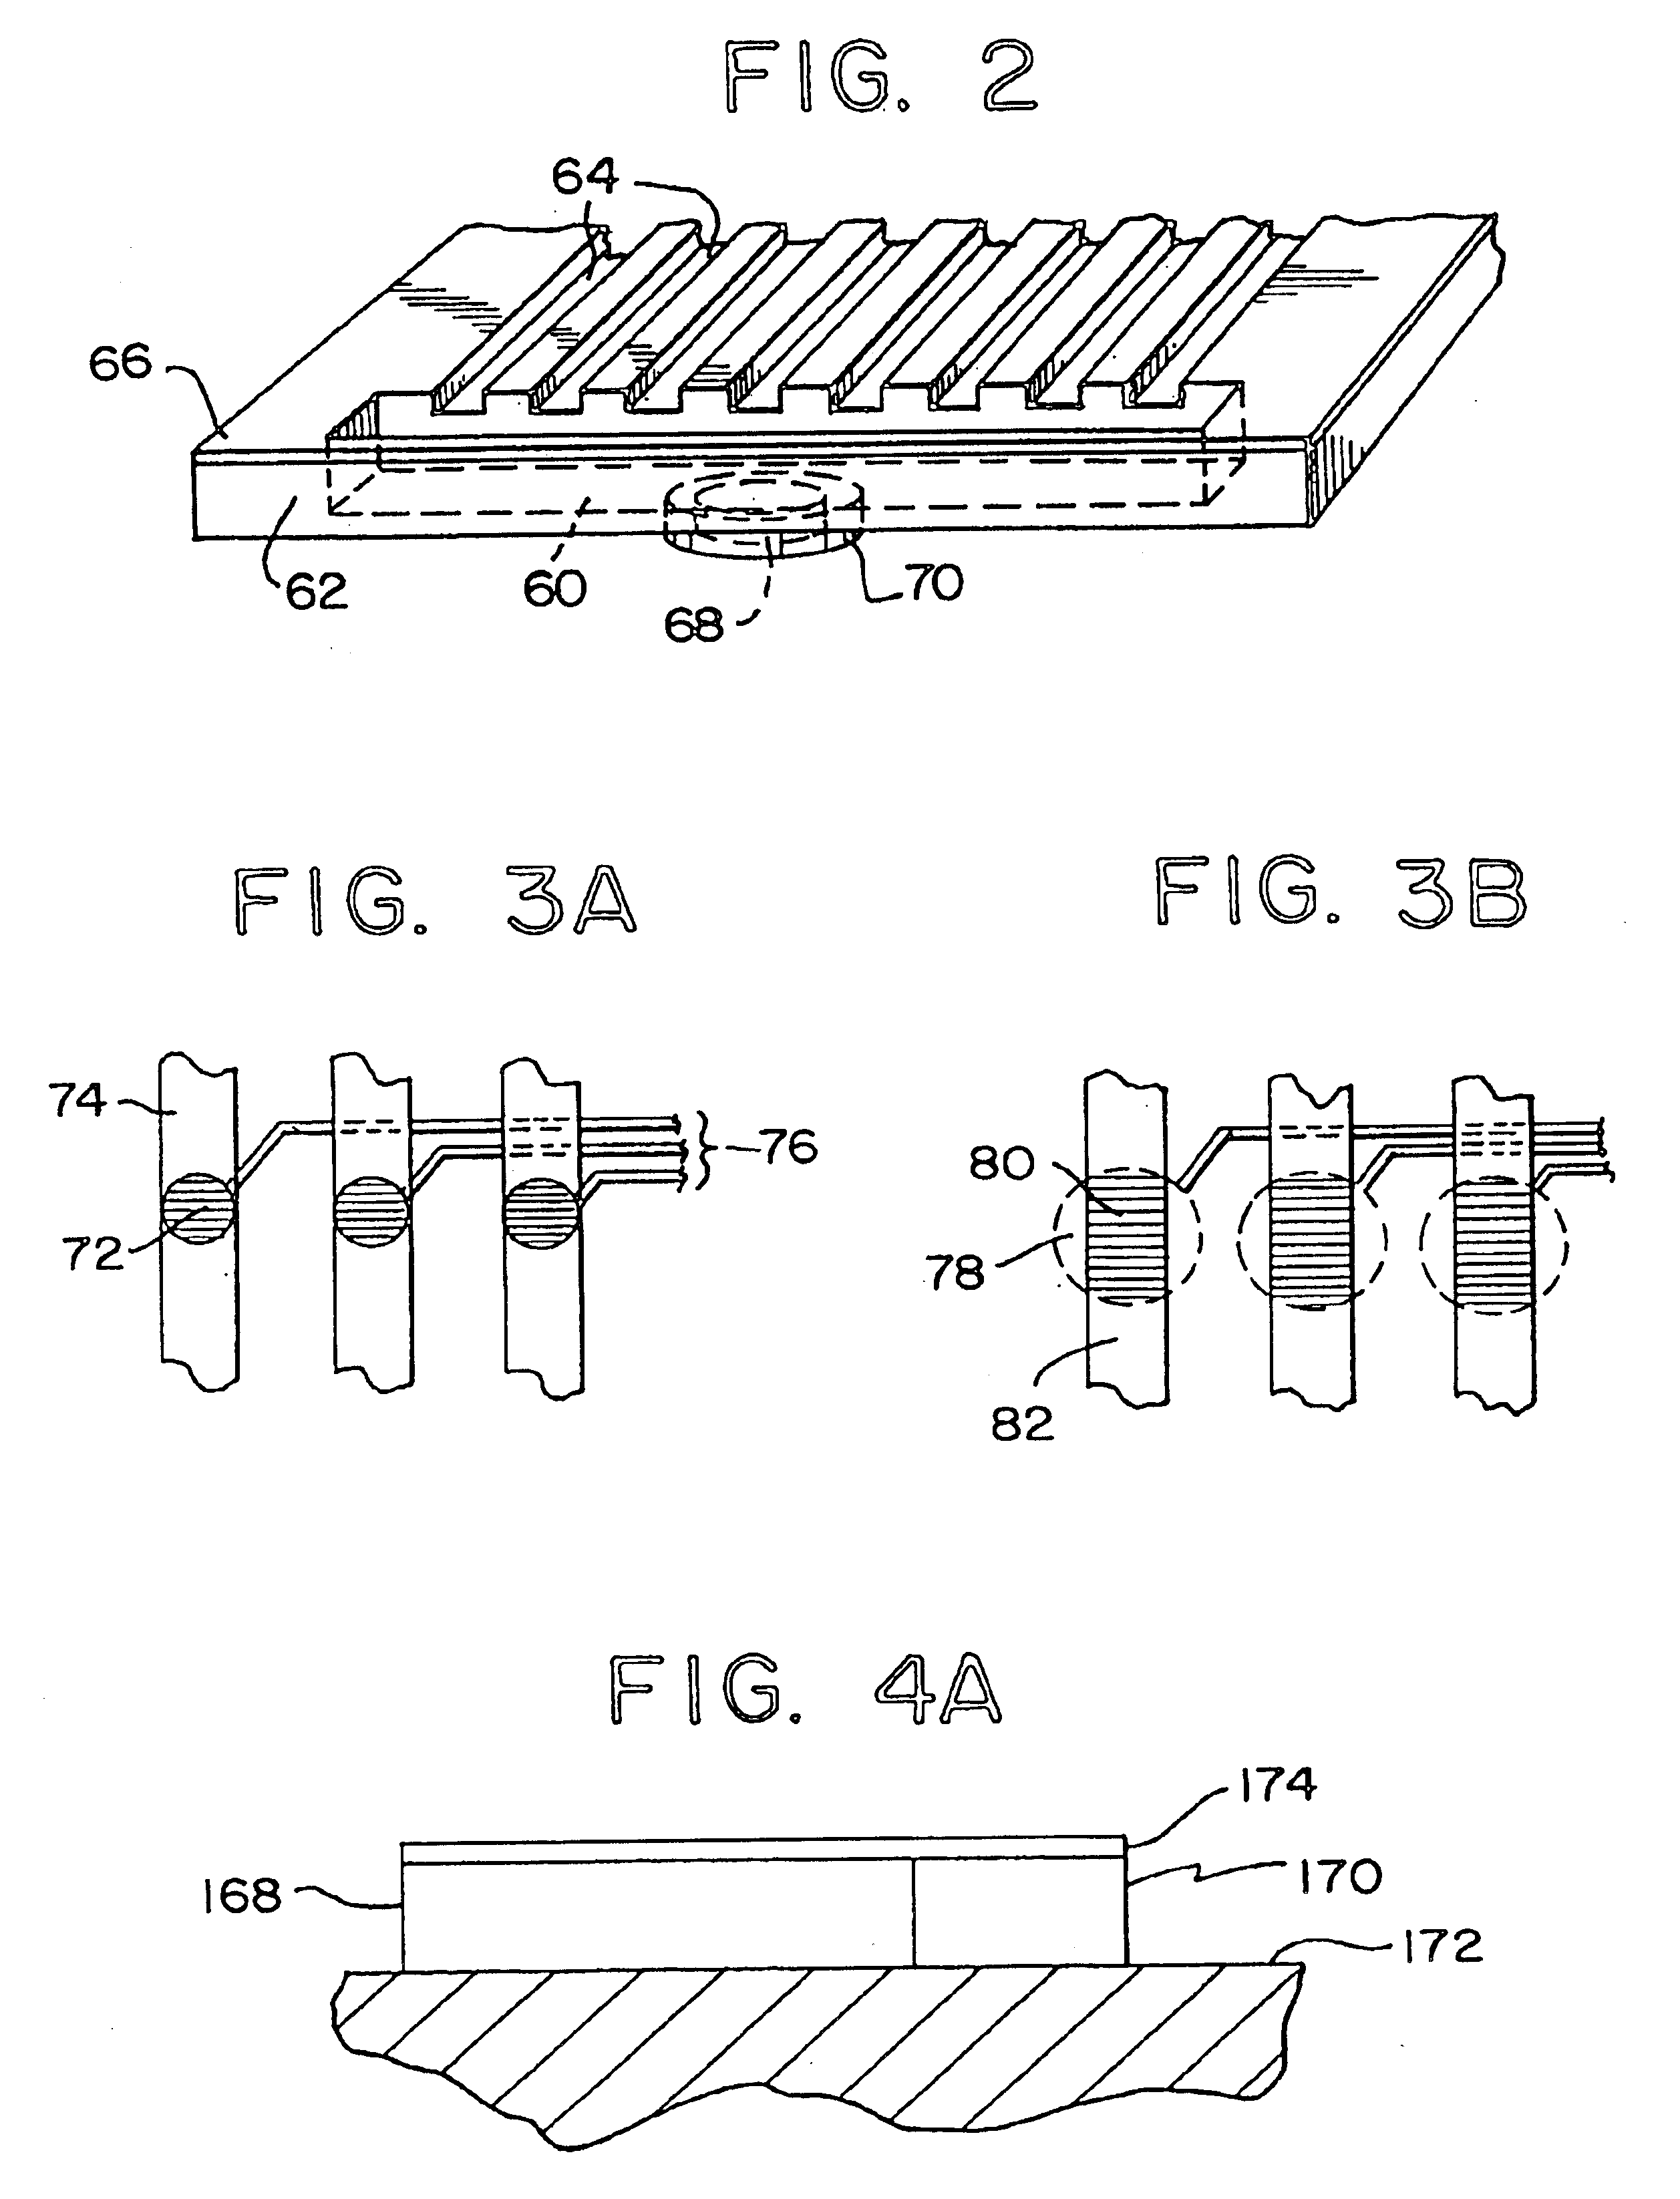 Methods for detecting and sorting polynucleotides based on size